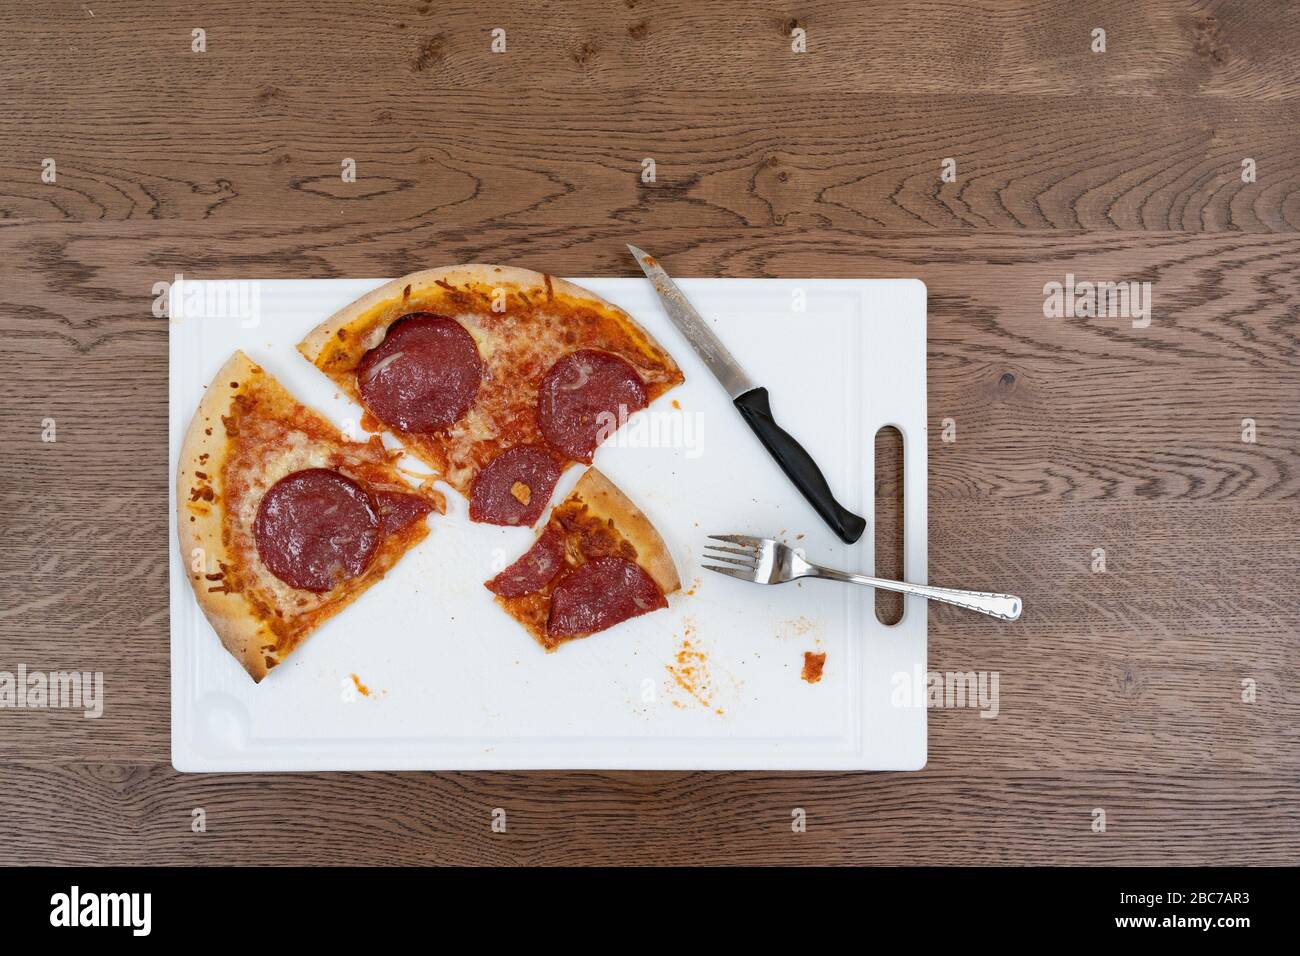 A salami pizza lies sliced during a meal on a white cutting board. Stock Photo